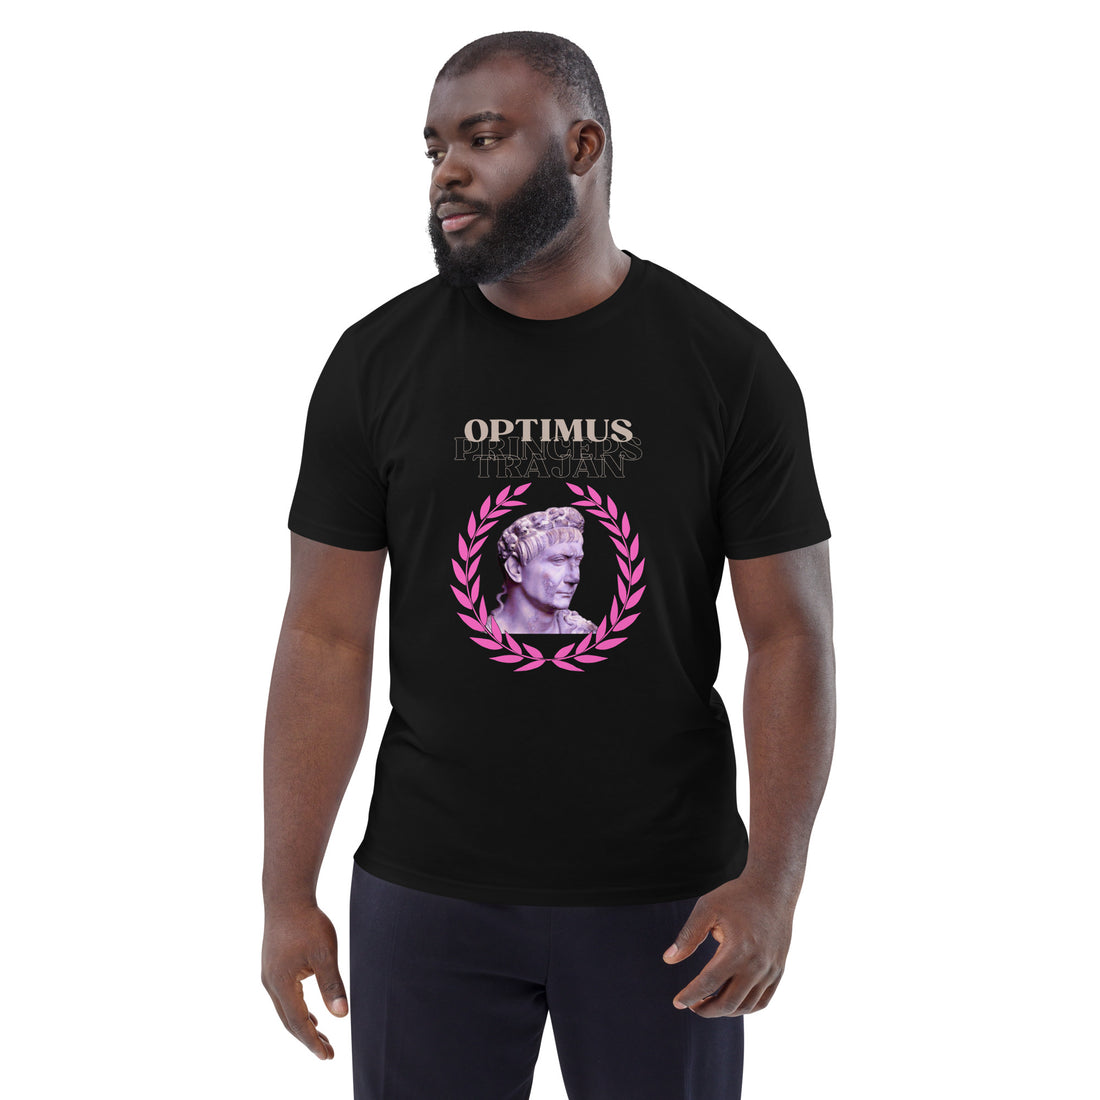 Optimus Princeps Trajan T-Shirt Embrace the Power of Greatness - Emperor